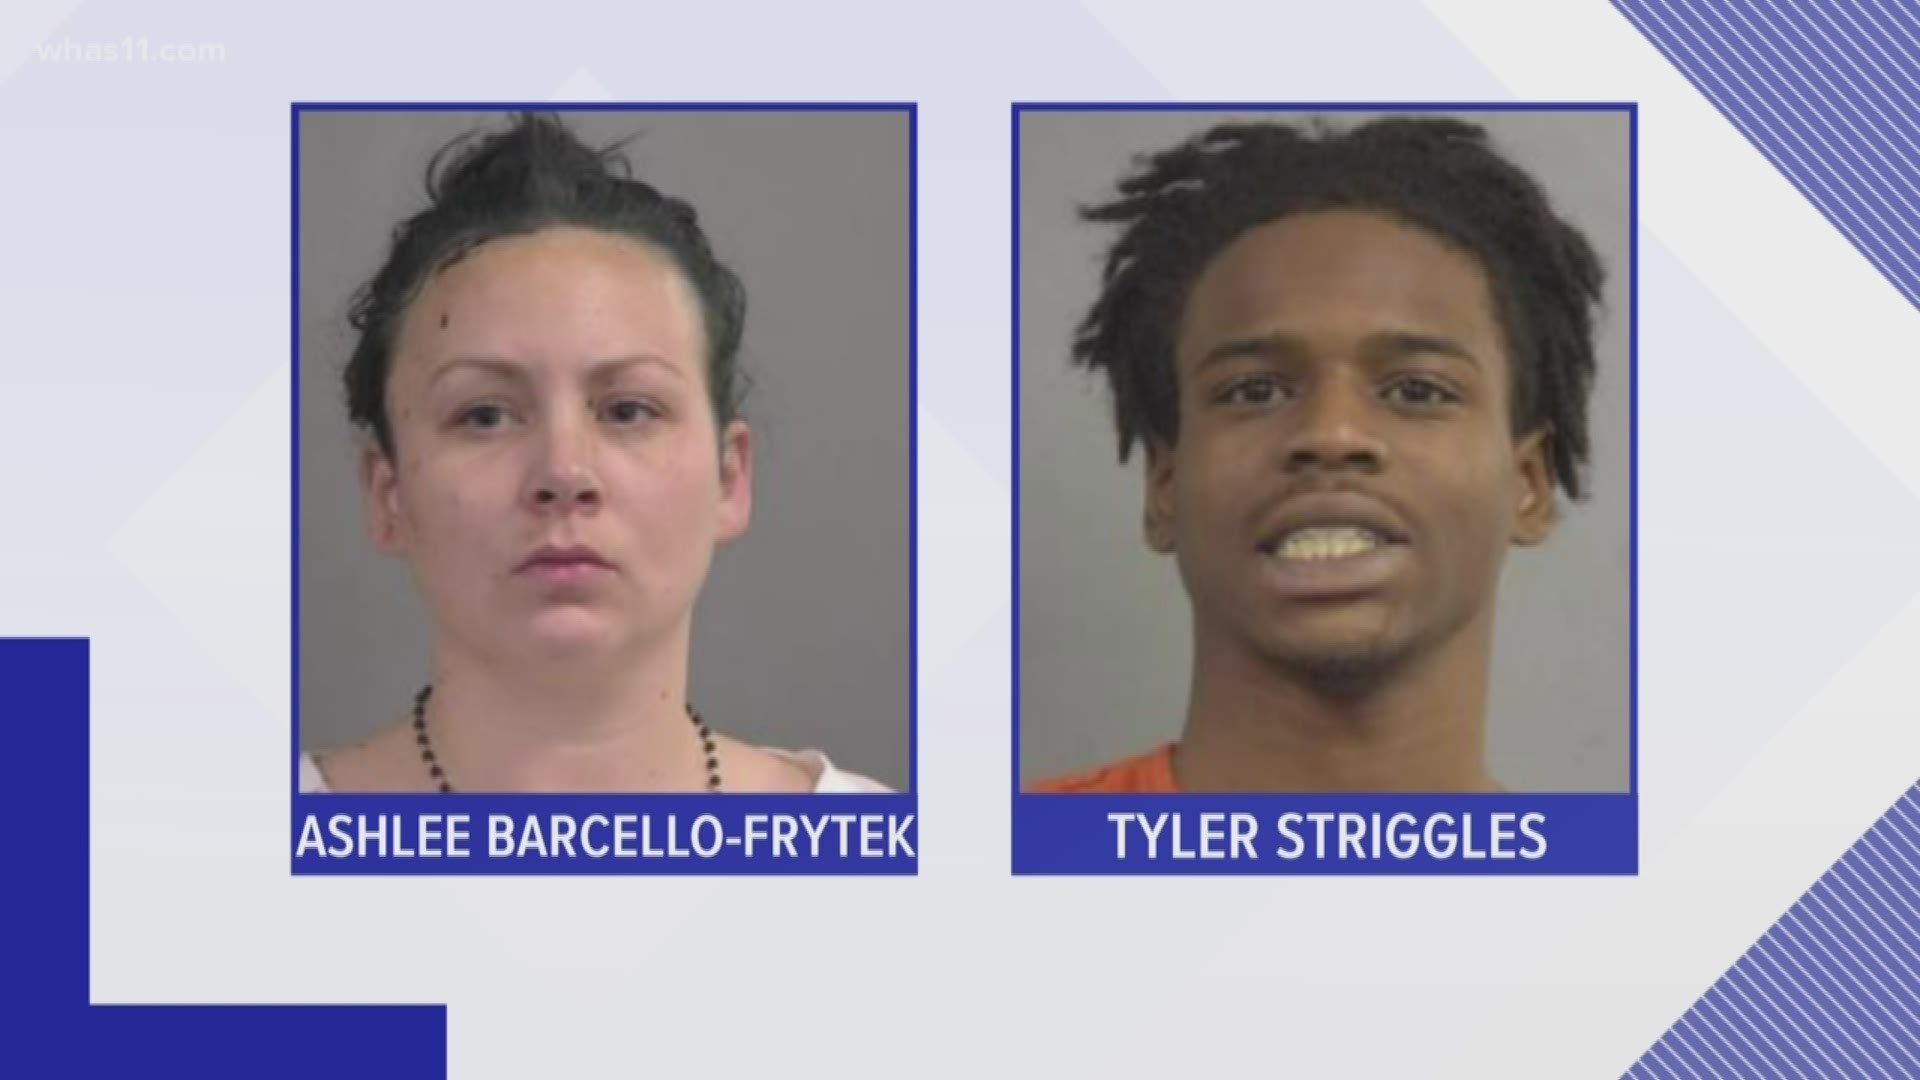 The two people in the fleeing vehicle arrested were identified as Fort Lauderdale, Fla. residents 26-year-old Ashlee Barcello-Frytek and 18-year-old Tyler Striggles.